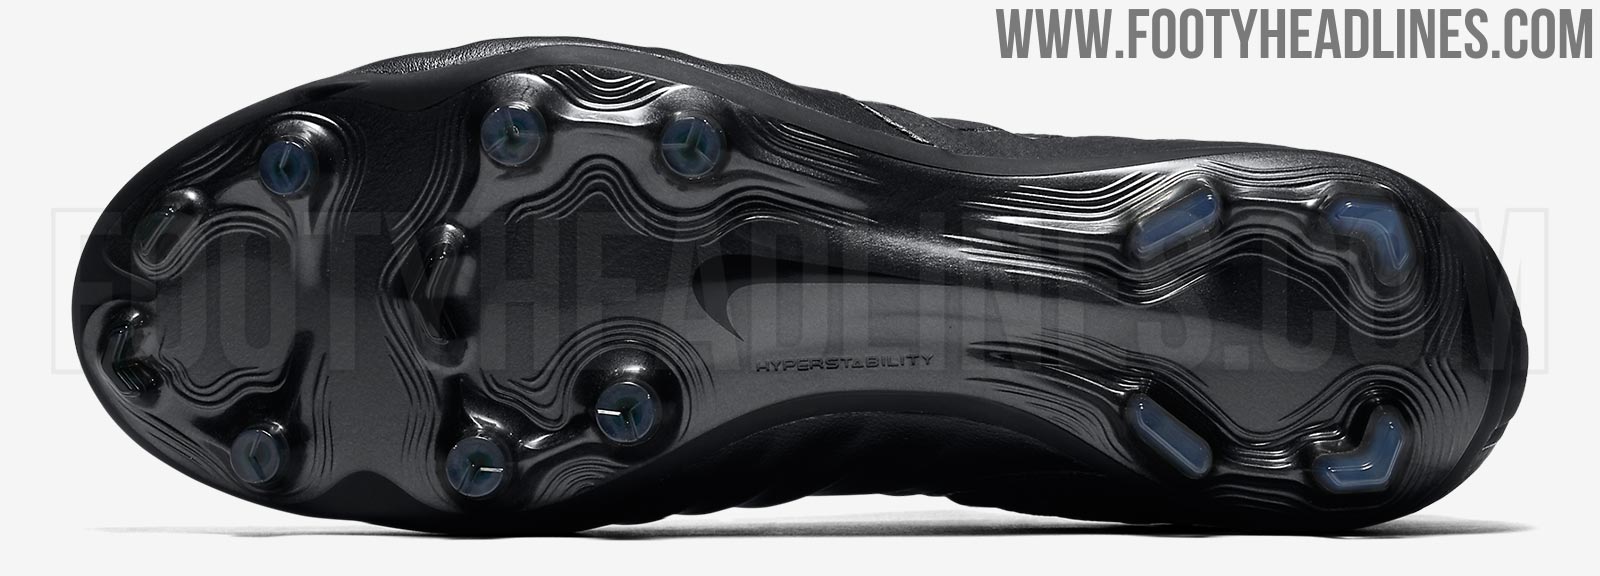 Pure Class: Blackout Nike Tiempo Legend VII Boots Leaked - Footy Headlines